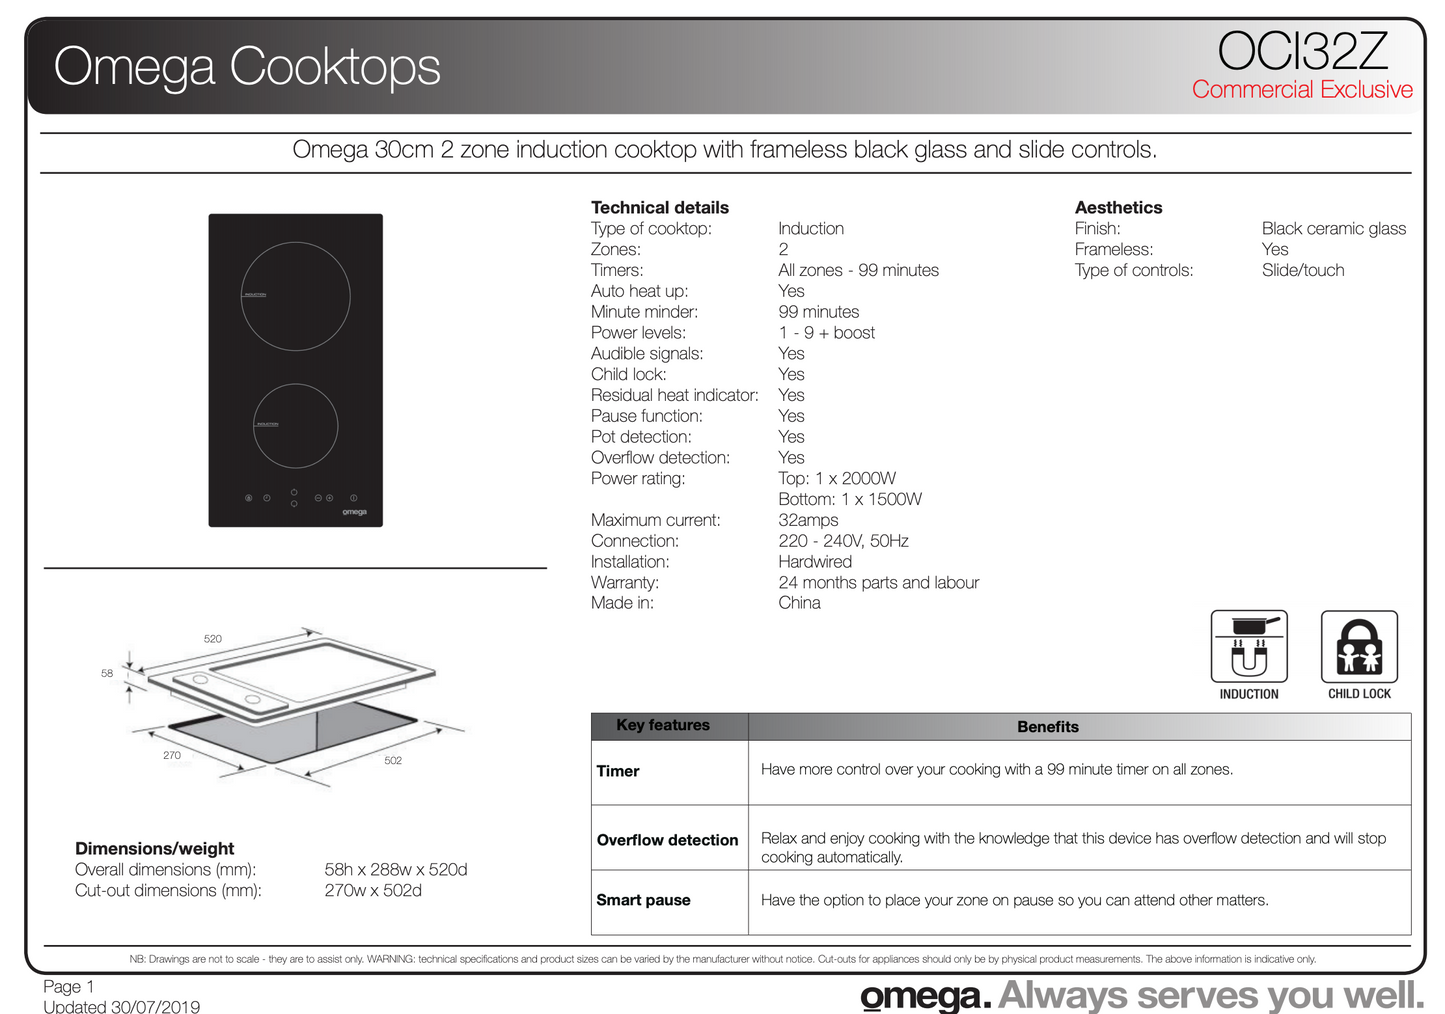 Omega OCI32Z 30cm Two Zone Induction Cooktop